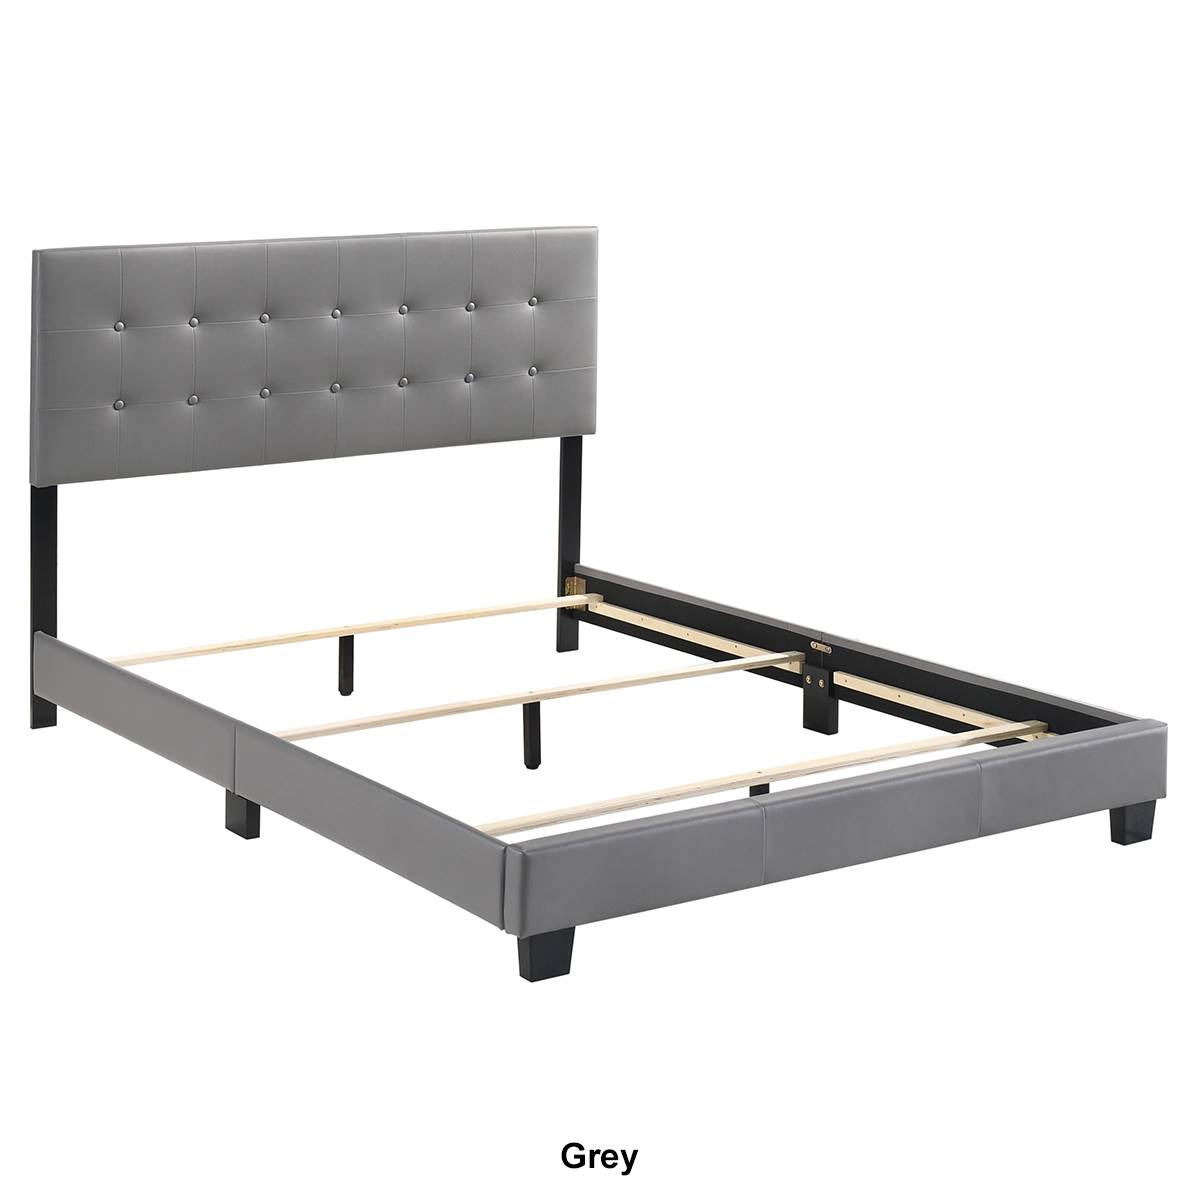 Passion Furniture Caldwell Panel Bed Frame - Full